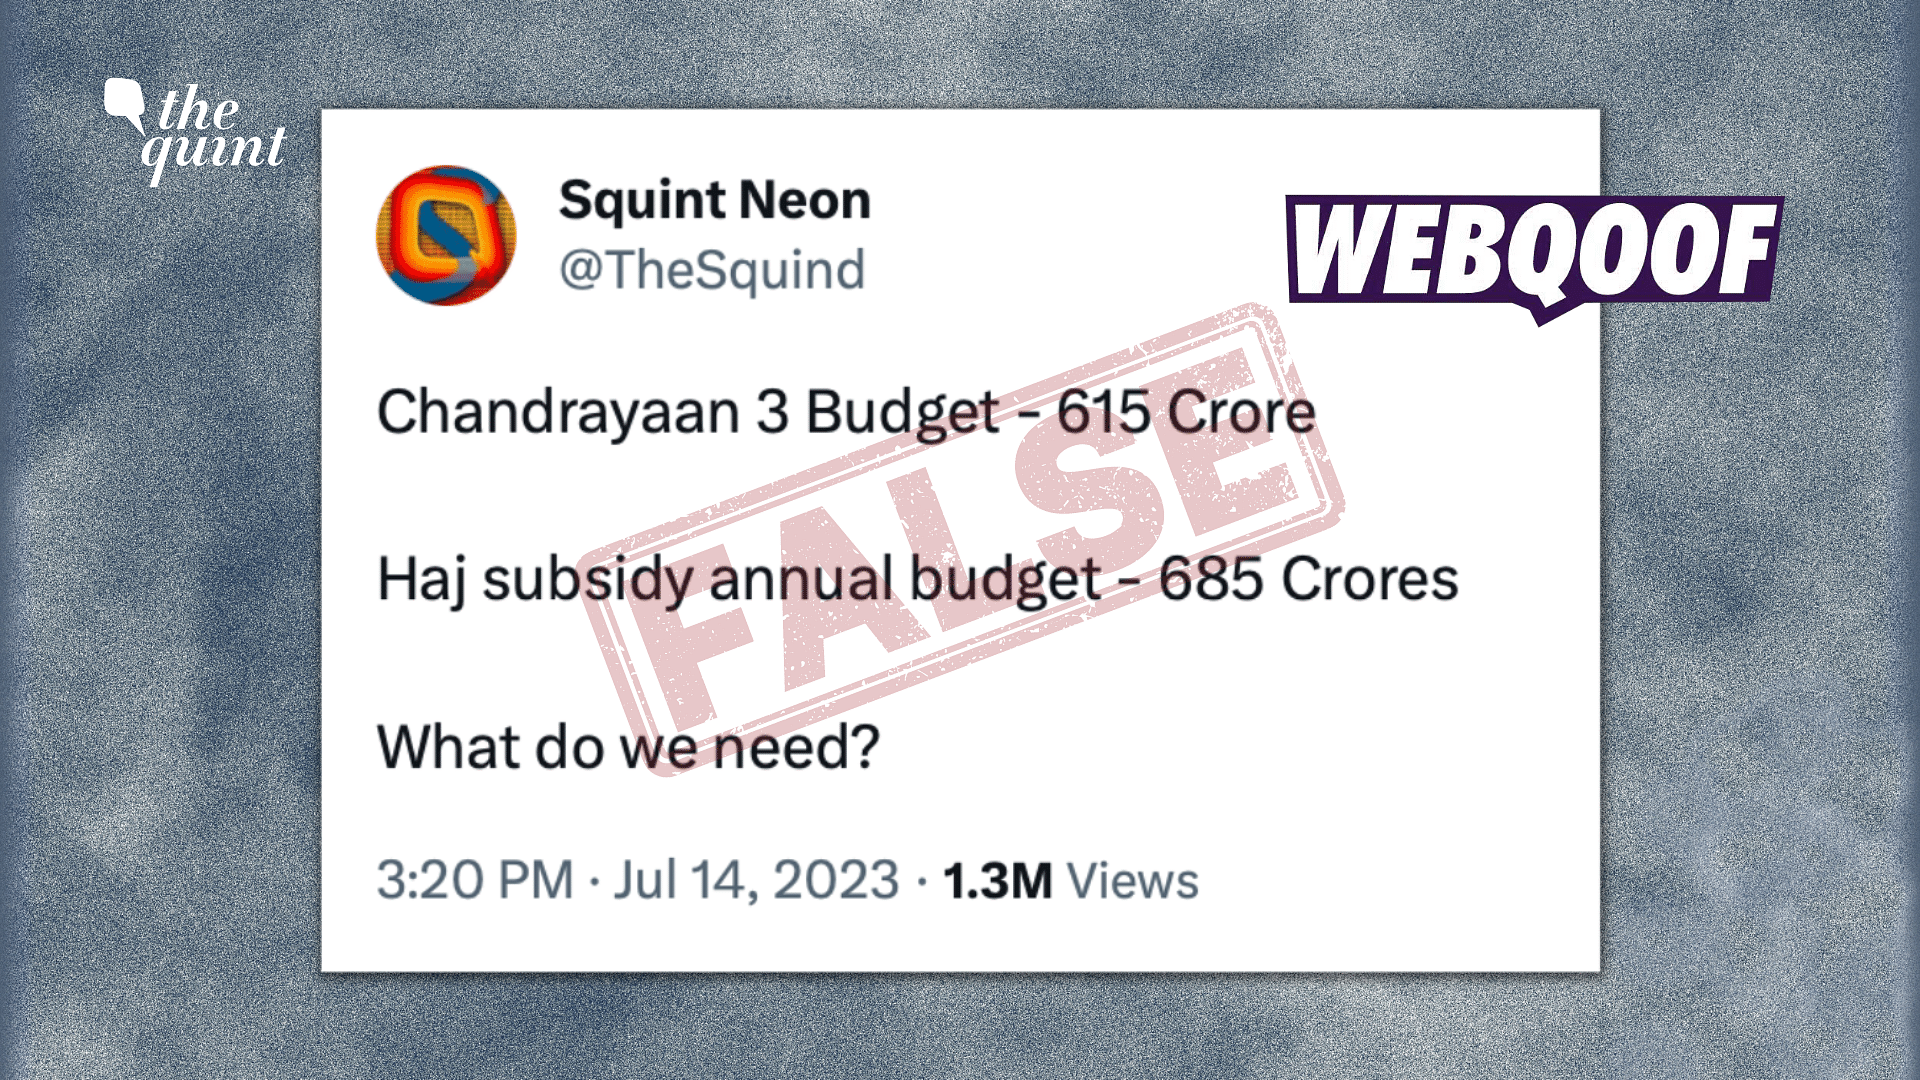 <div class="paragraphs"><p>The viral claim falsely states that the budget for ISRO's Chandrayaan-3 was lower than the budget for the annual Haj pilgrimage subsidy.</p></div>